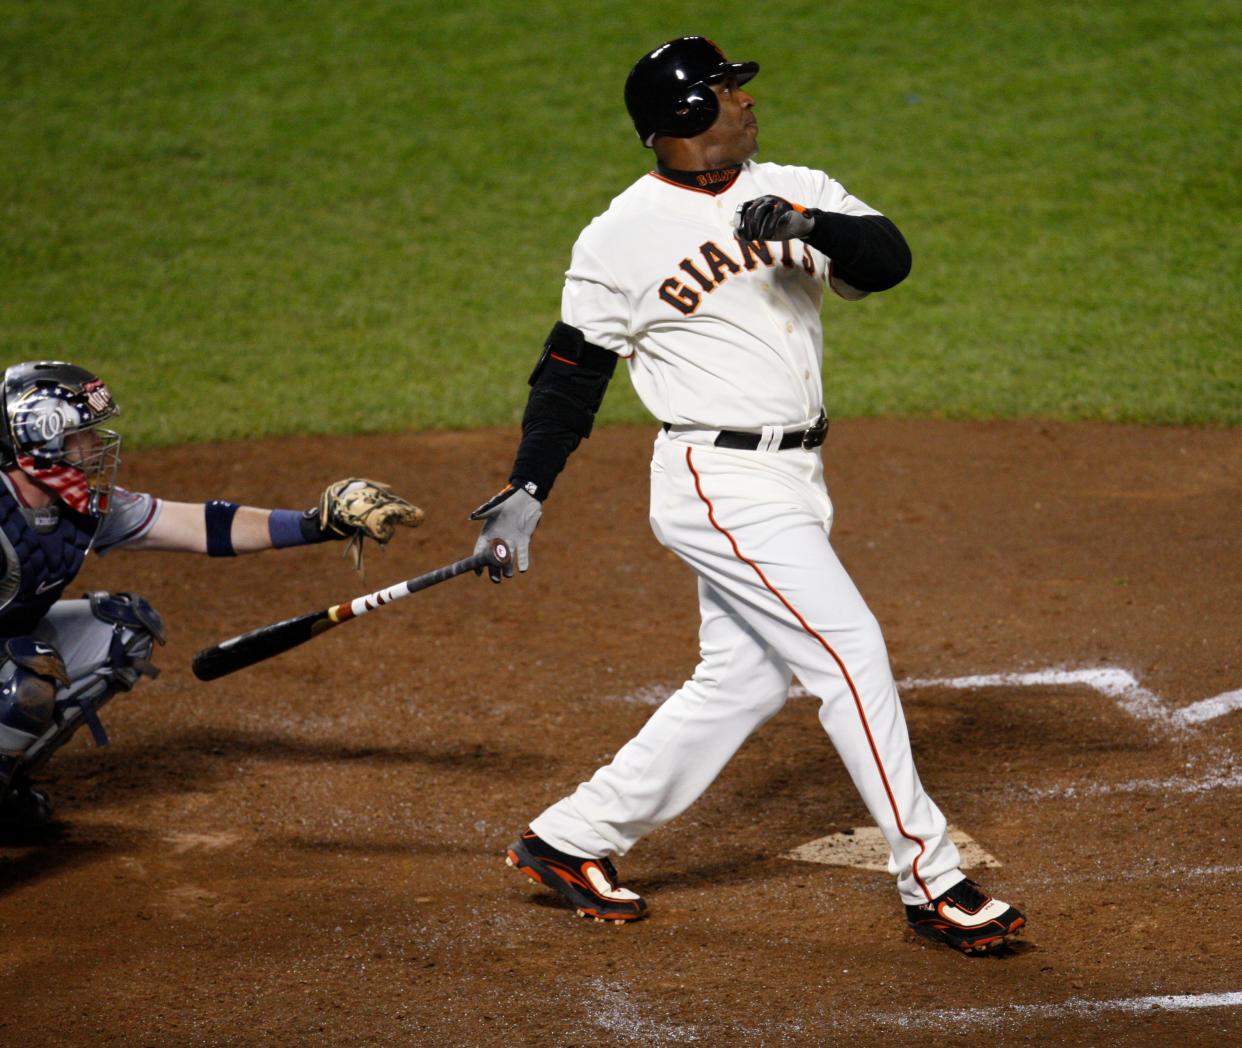 San Francisco Giants' Barry Bonds hits home run number 756 off Washington Nationals pitcher Mike Bacsik breaking Hank Aaron's all-time Major League Baseball career home run record of 755 on Aug. 7, 2007 at AT&T Park in San Francisco, Calif. becoming the career all-time home run record holder.